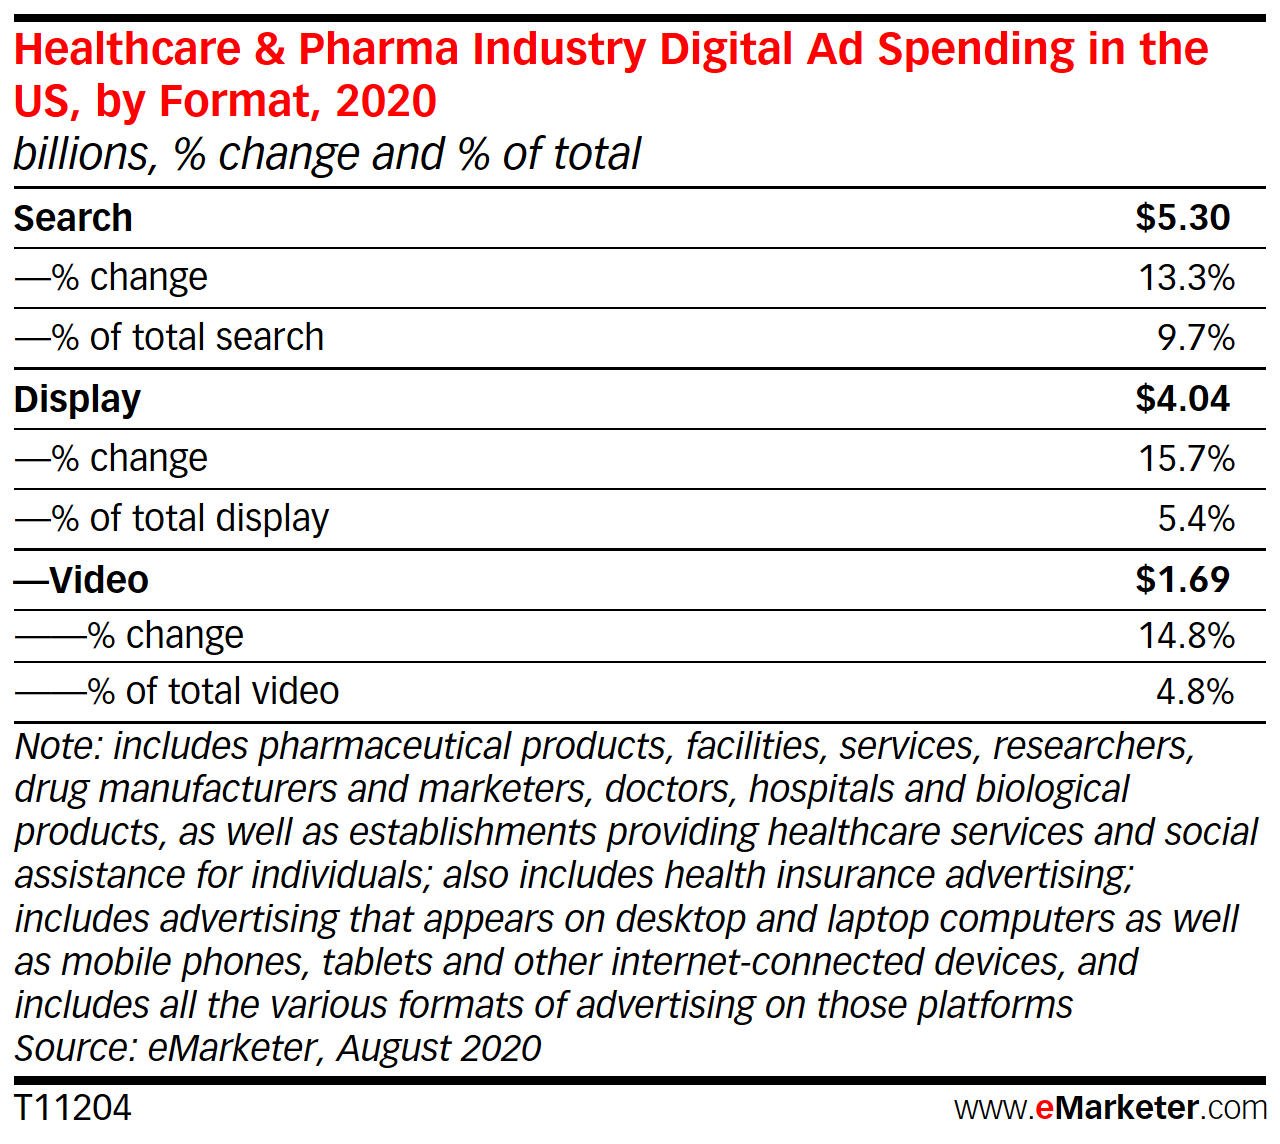 Healthcare & Pharma Industry Digital Ad Spending in the US, by Format, 2020